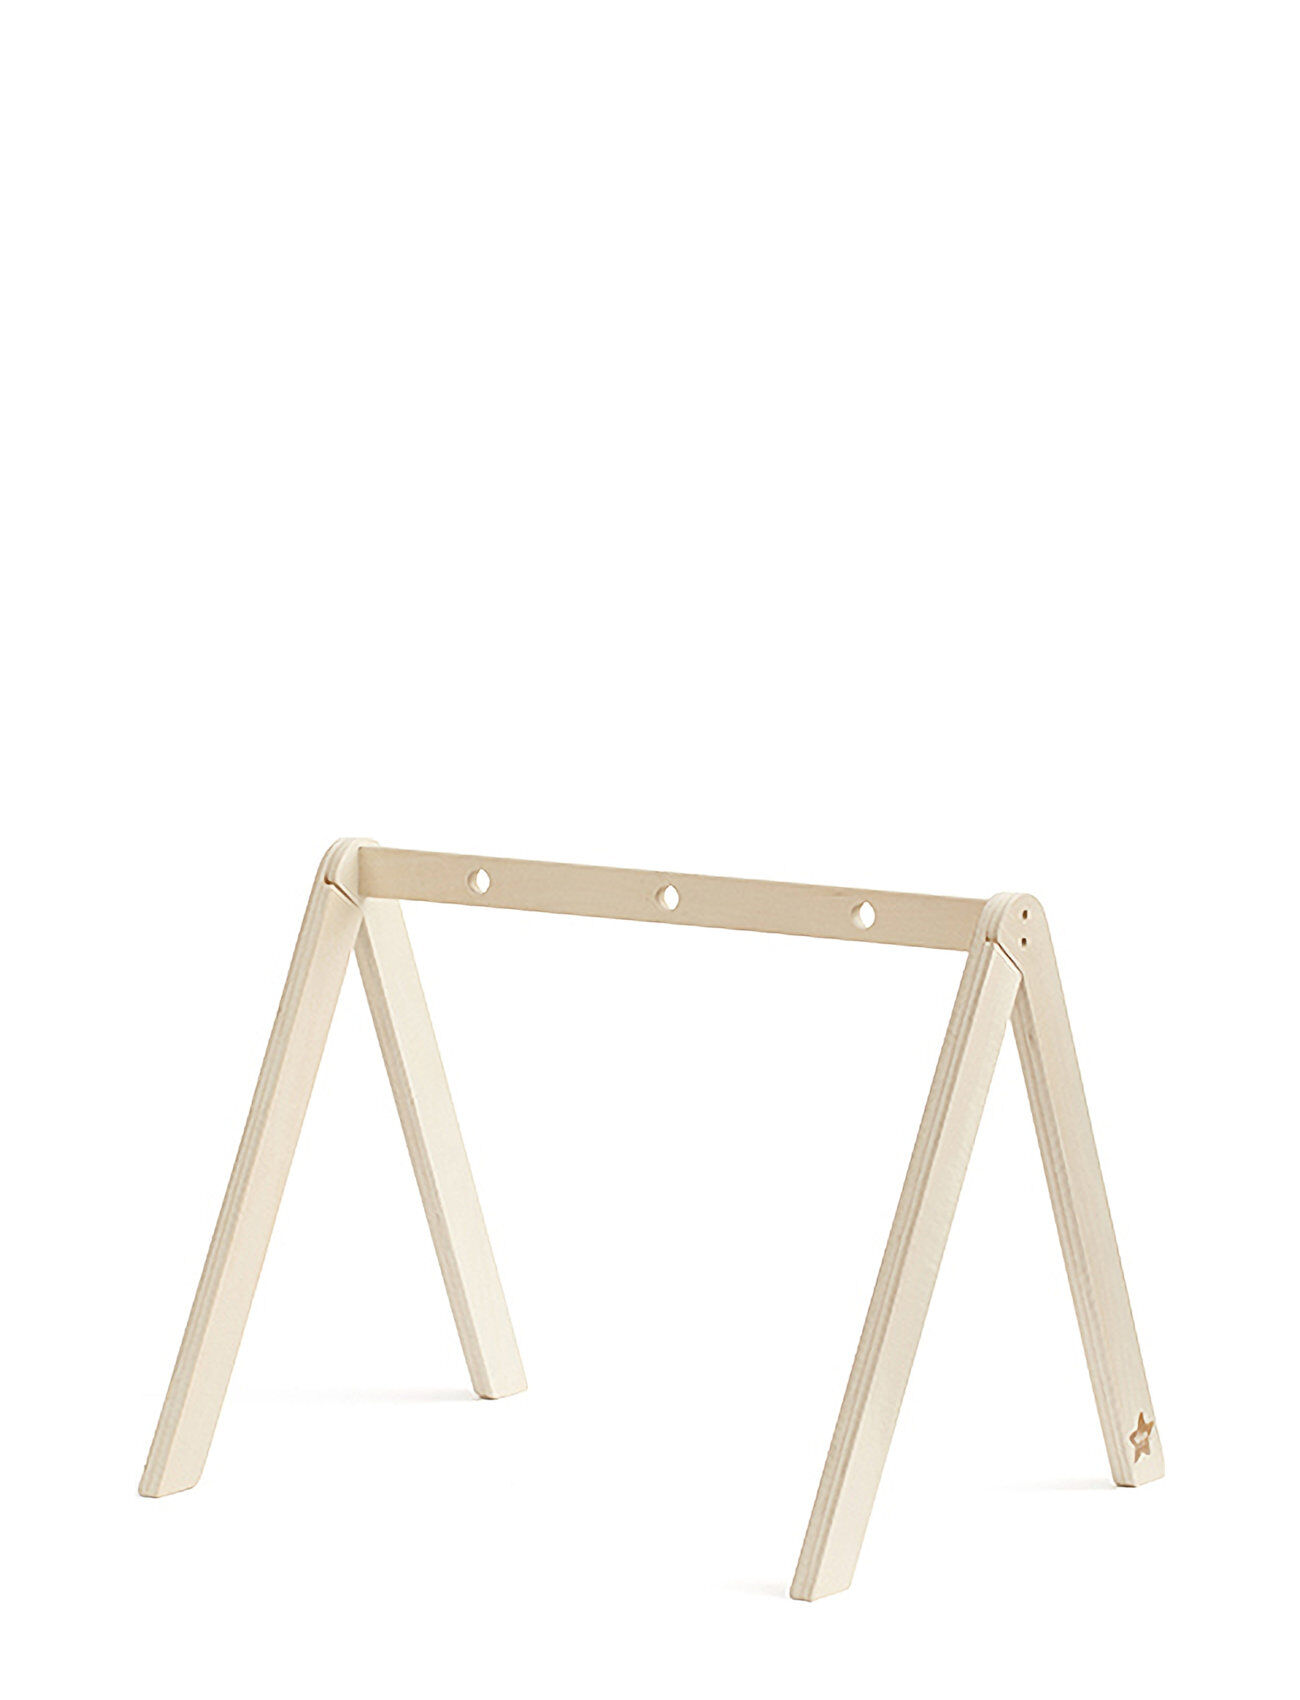 Kids Concept Baby Gym Wooden Frame Neo Baby & Maternity Activity Gyms Beige Kids Concept